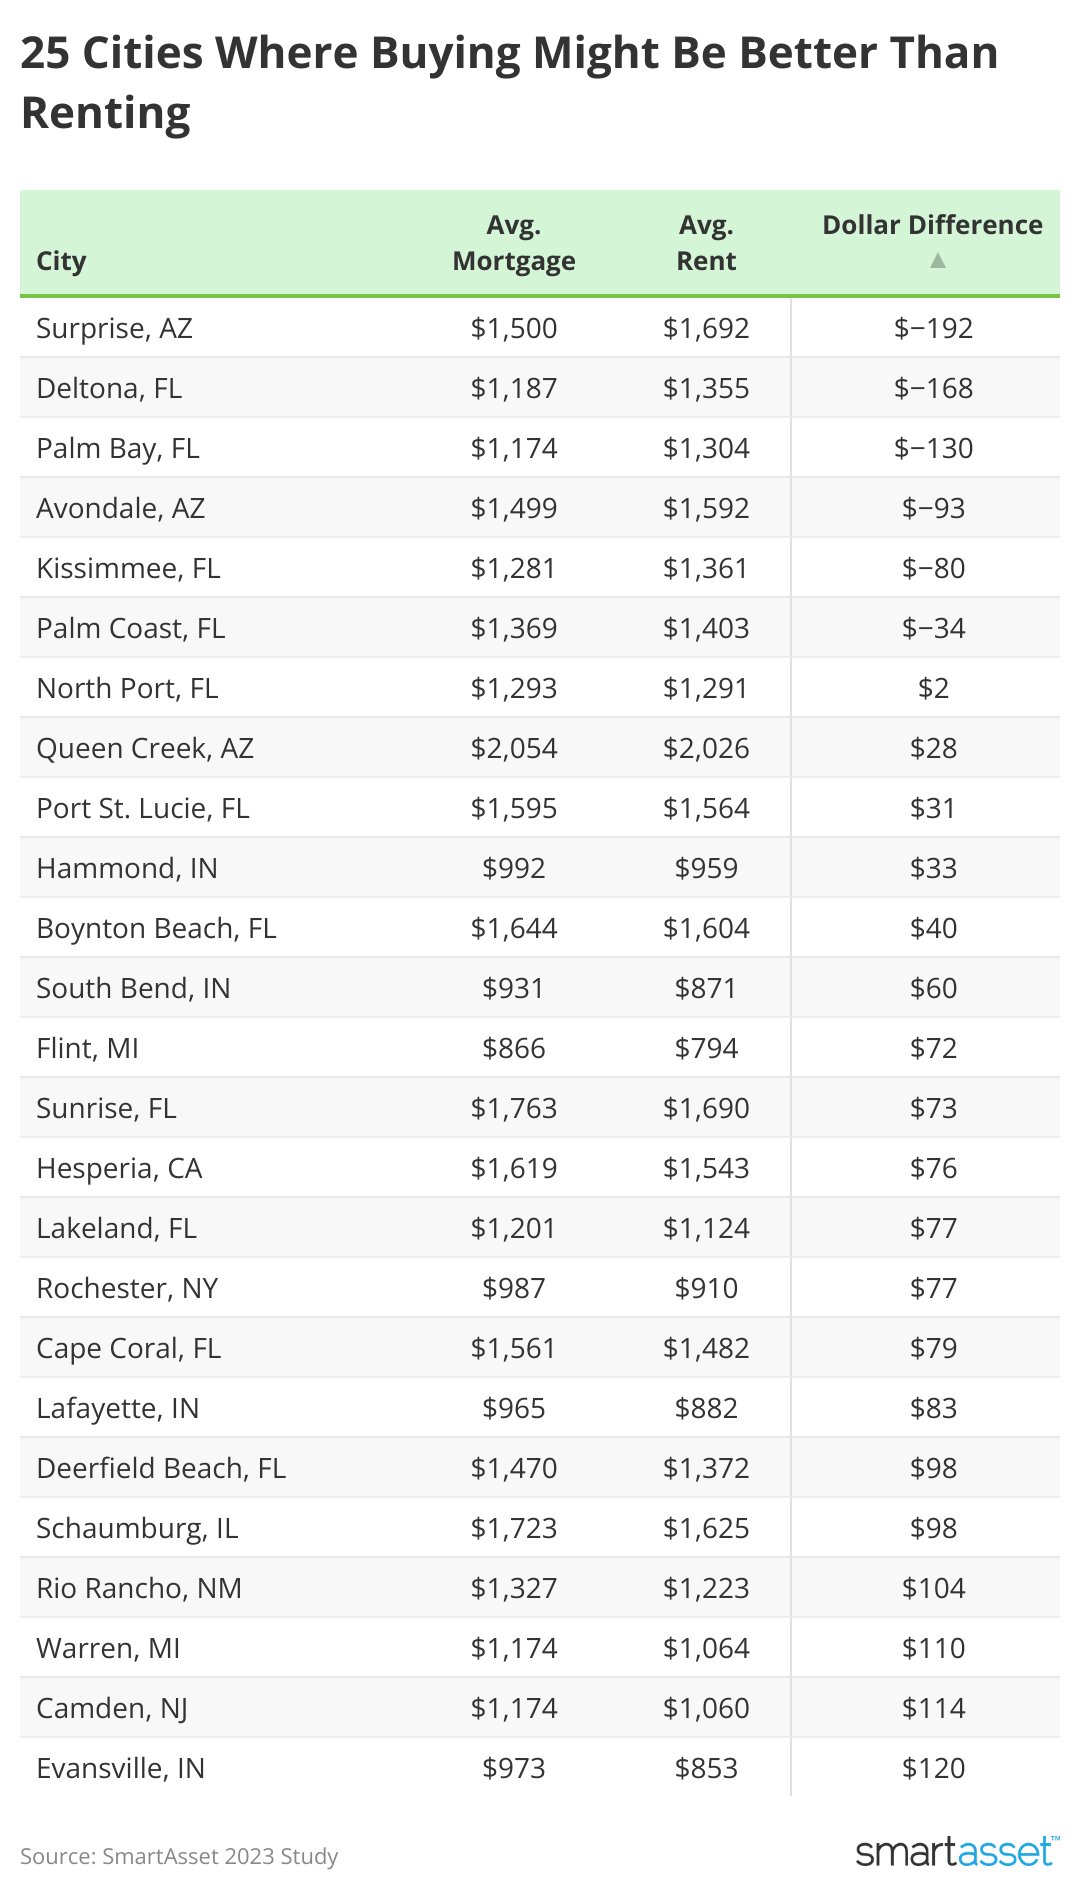 A table listing 25 U.S. cities where average mortgage costs are lower than average rents.